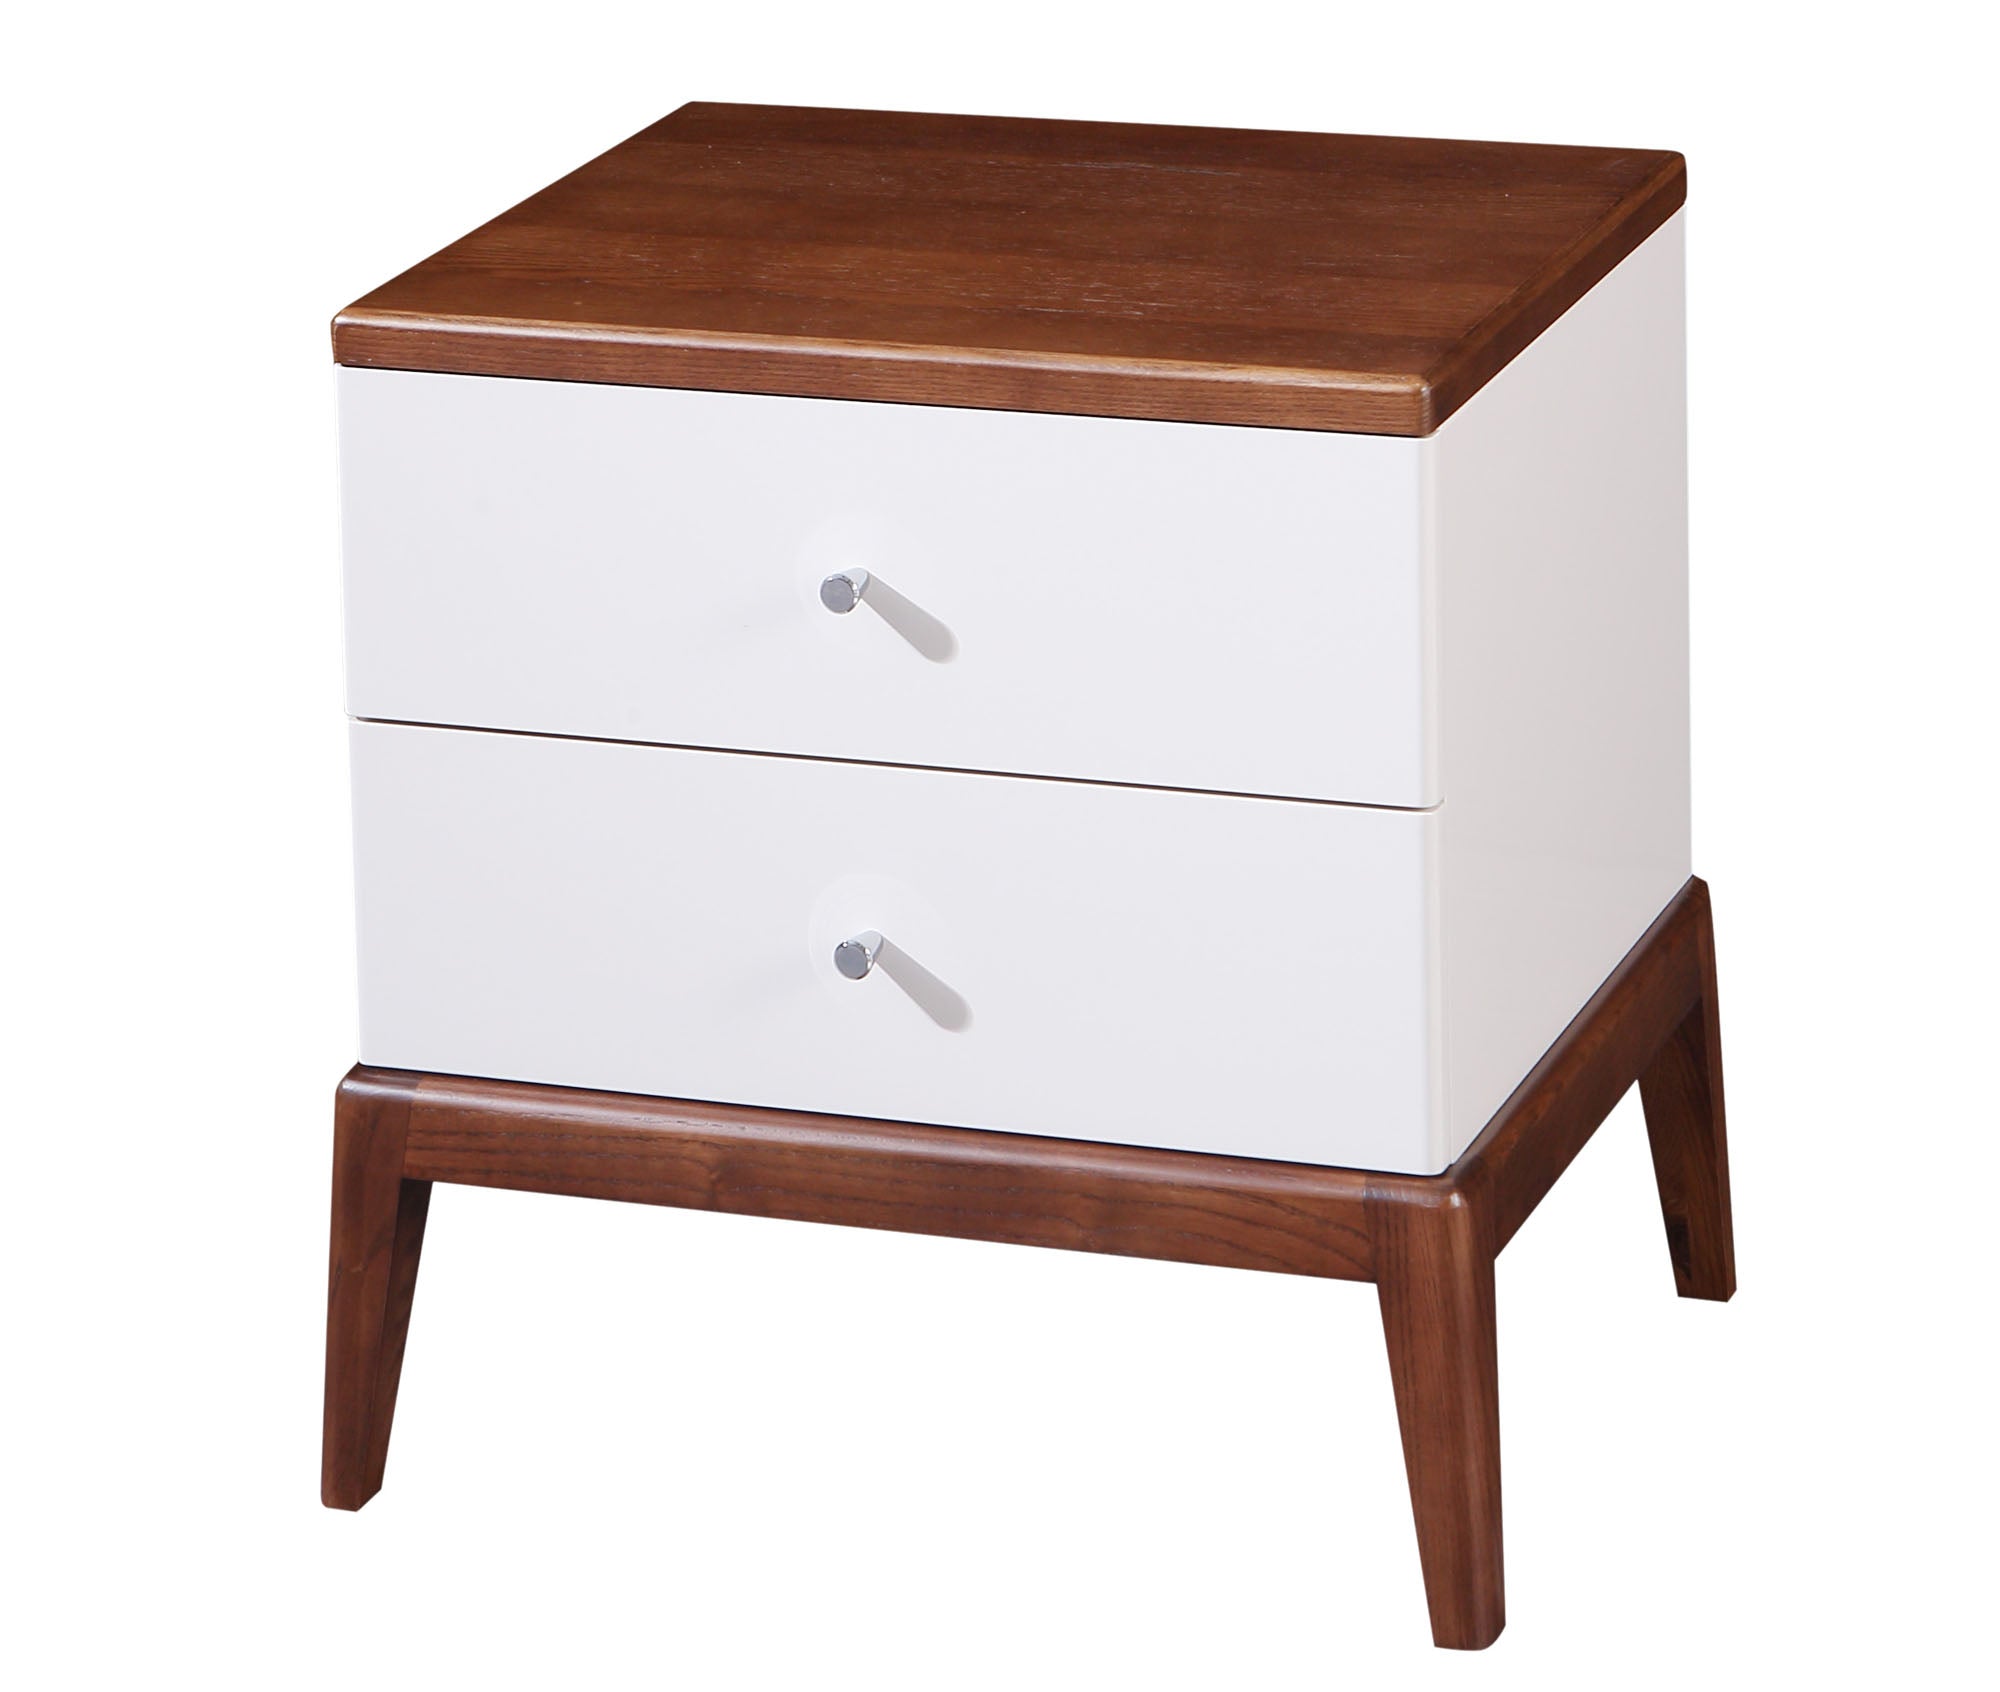 Tranquility Nightstand - MJM Furniture